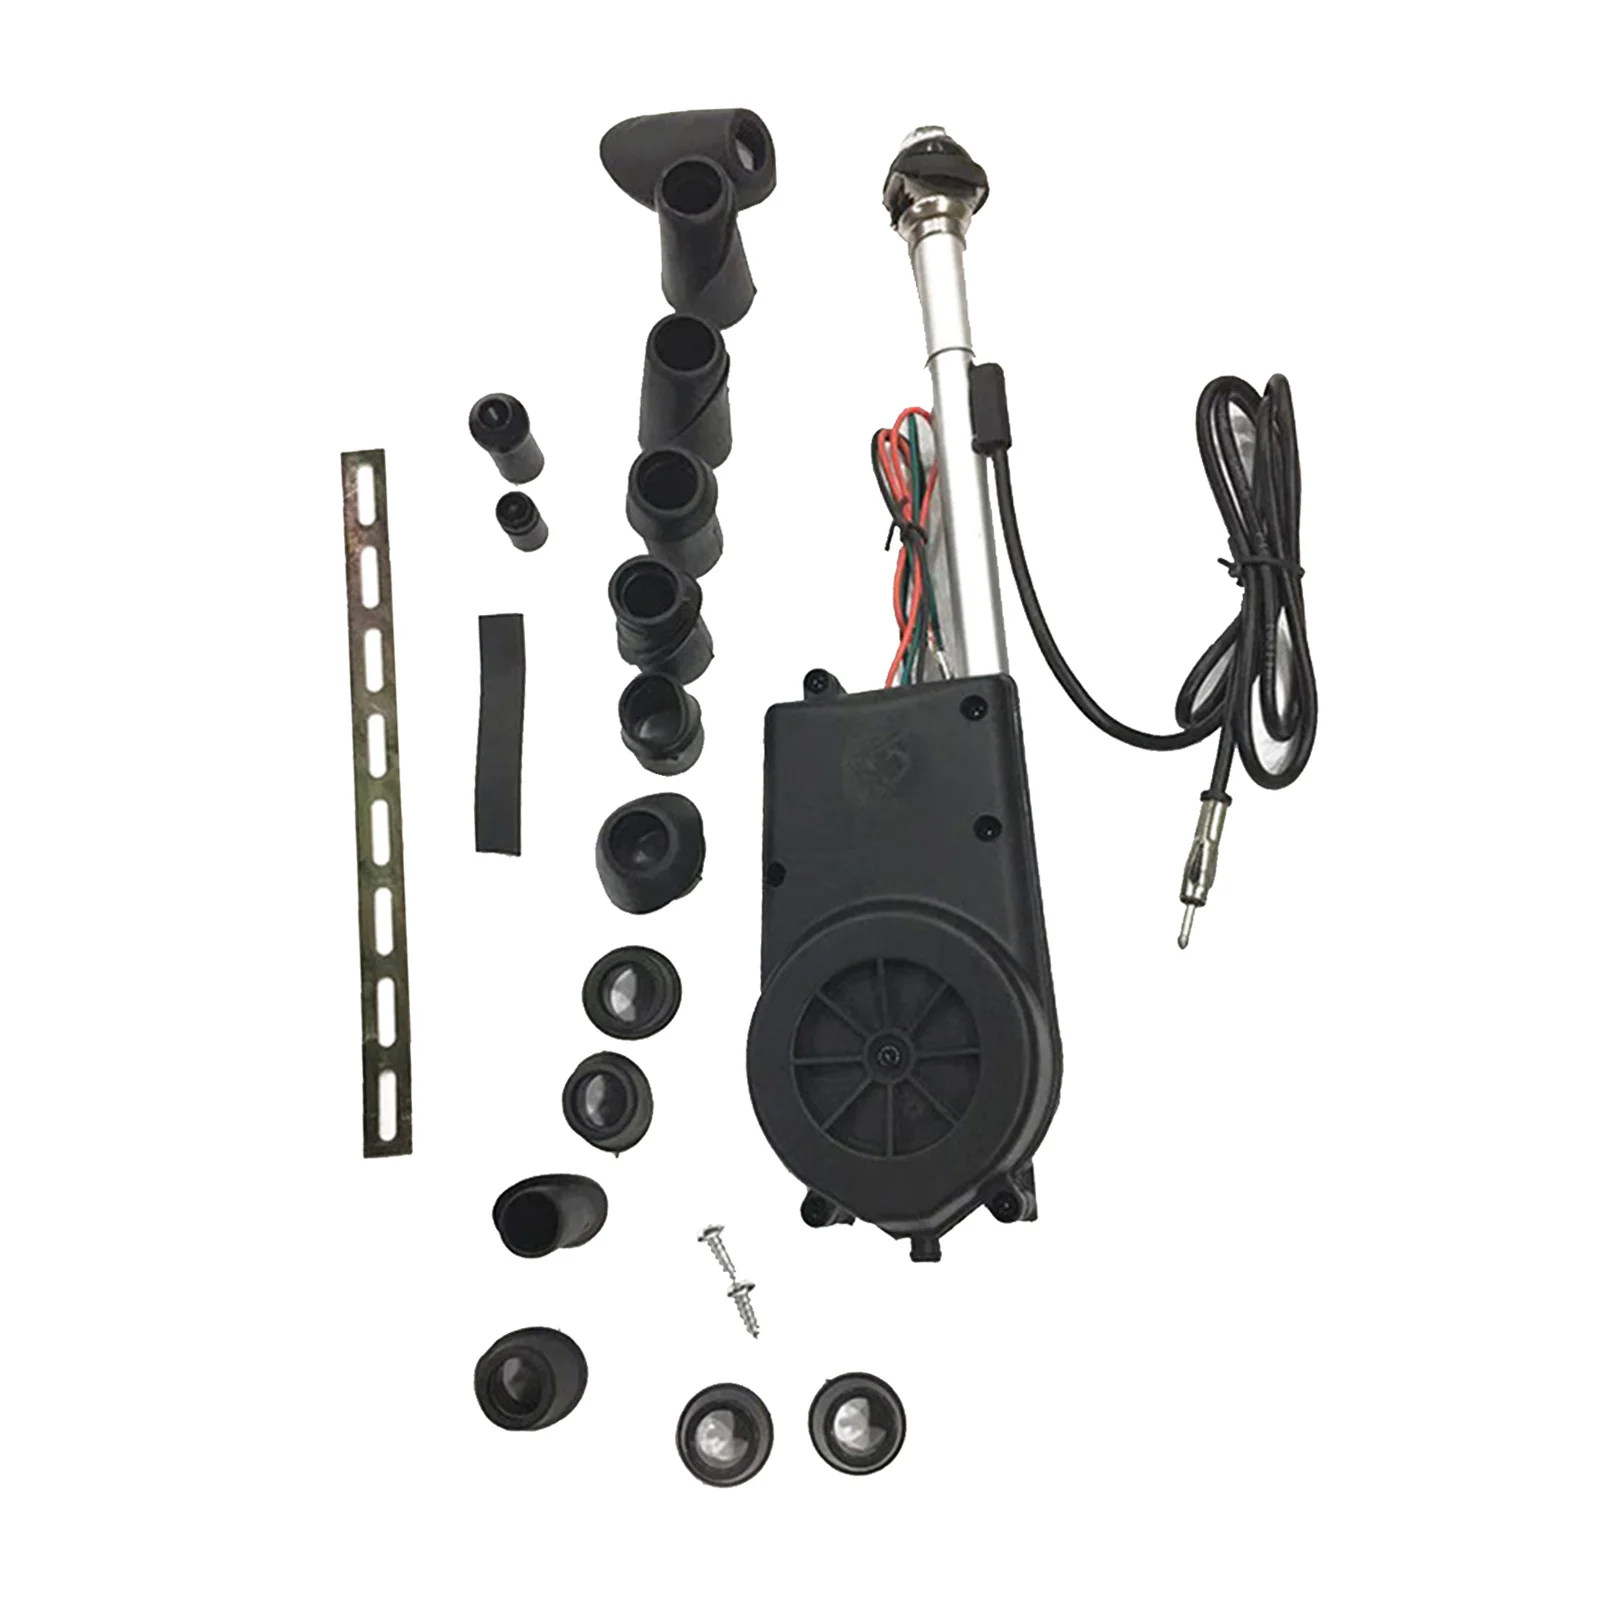   Fitting Set with Mounting Head / Radio, Durable Premium Material